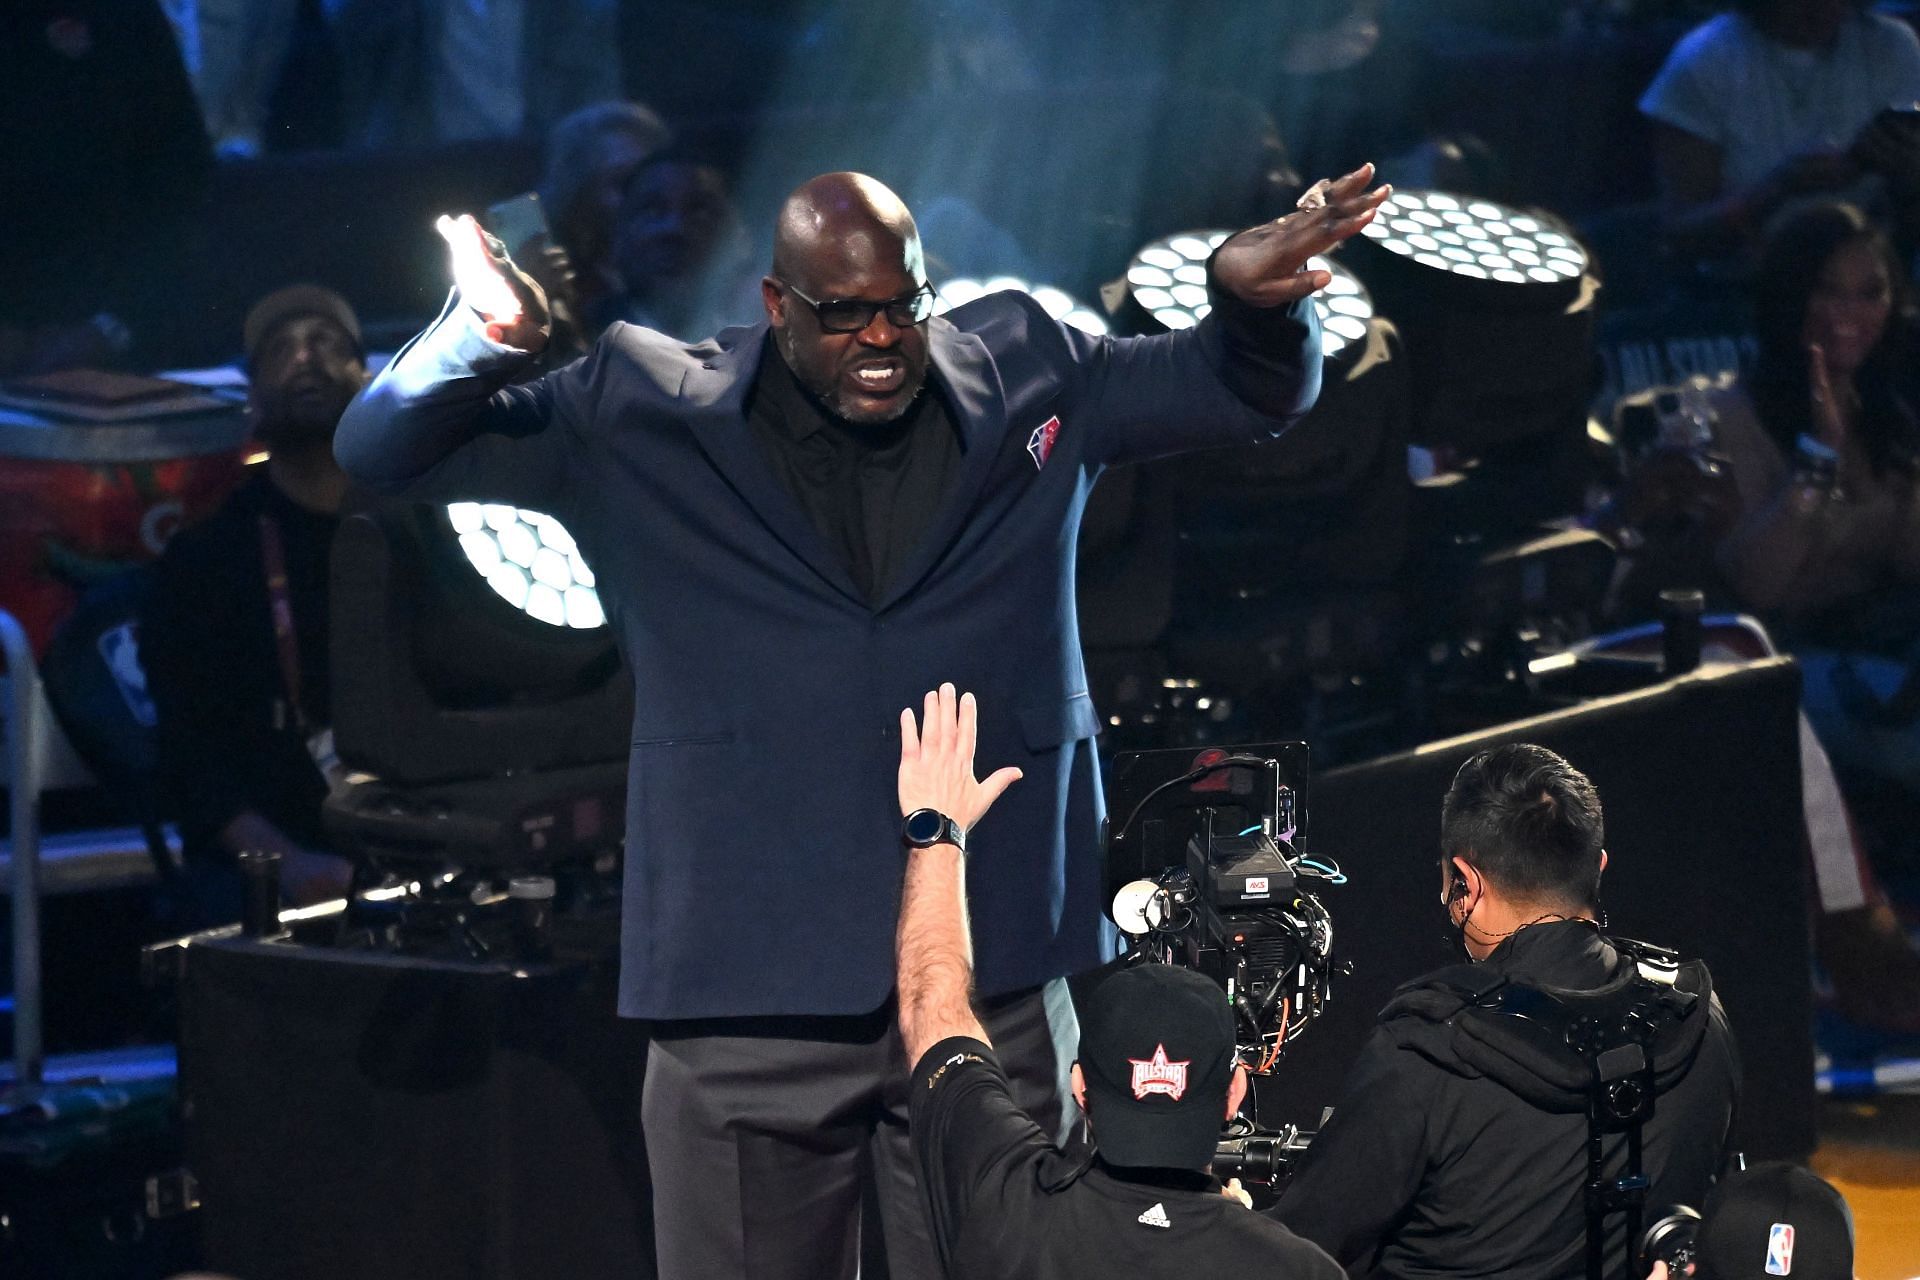 Shaq during the NBA All-Star Weekend